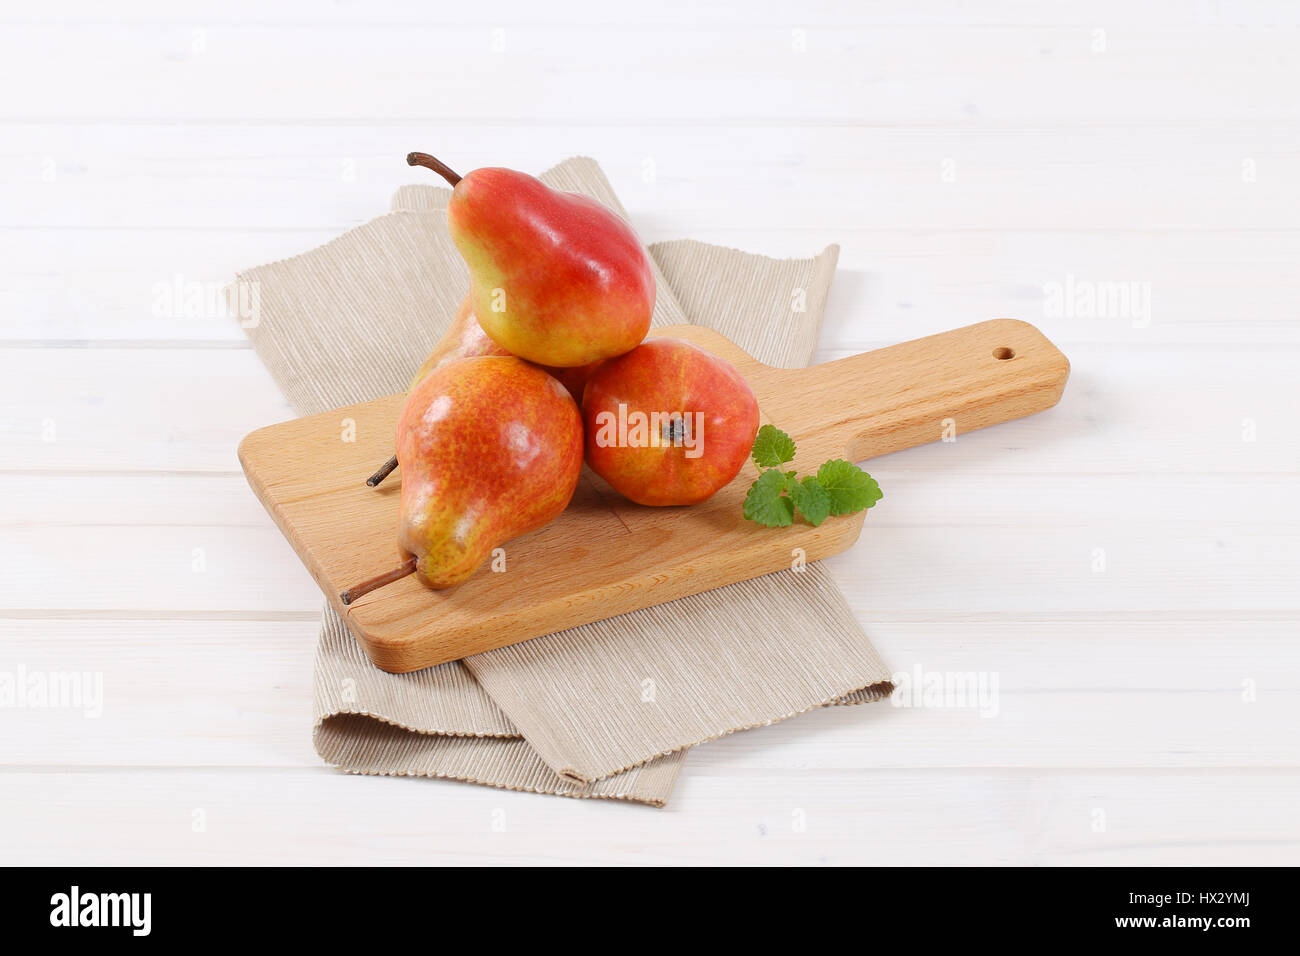 ripe red pears on wooden cutting board Stock Photo